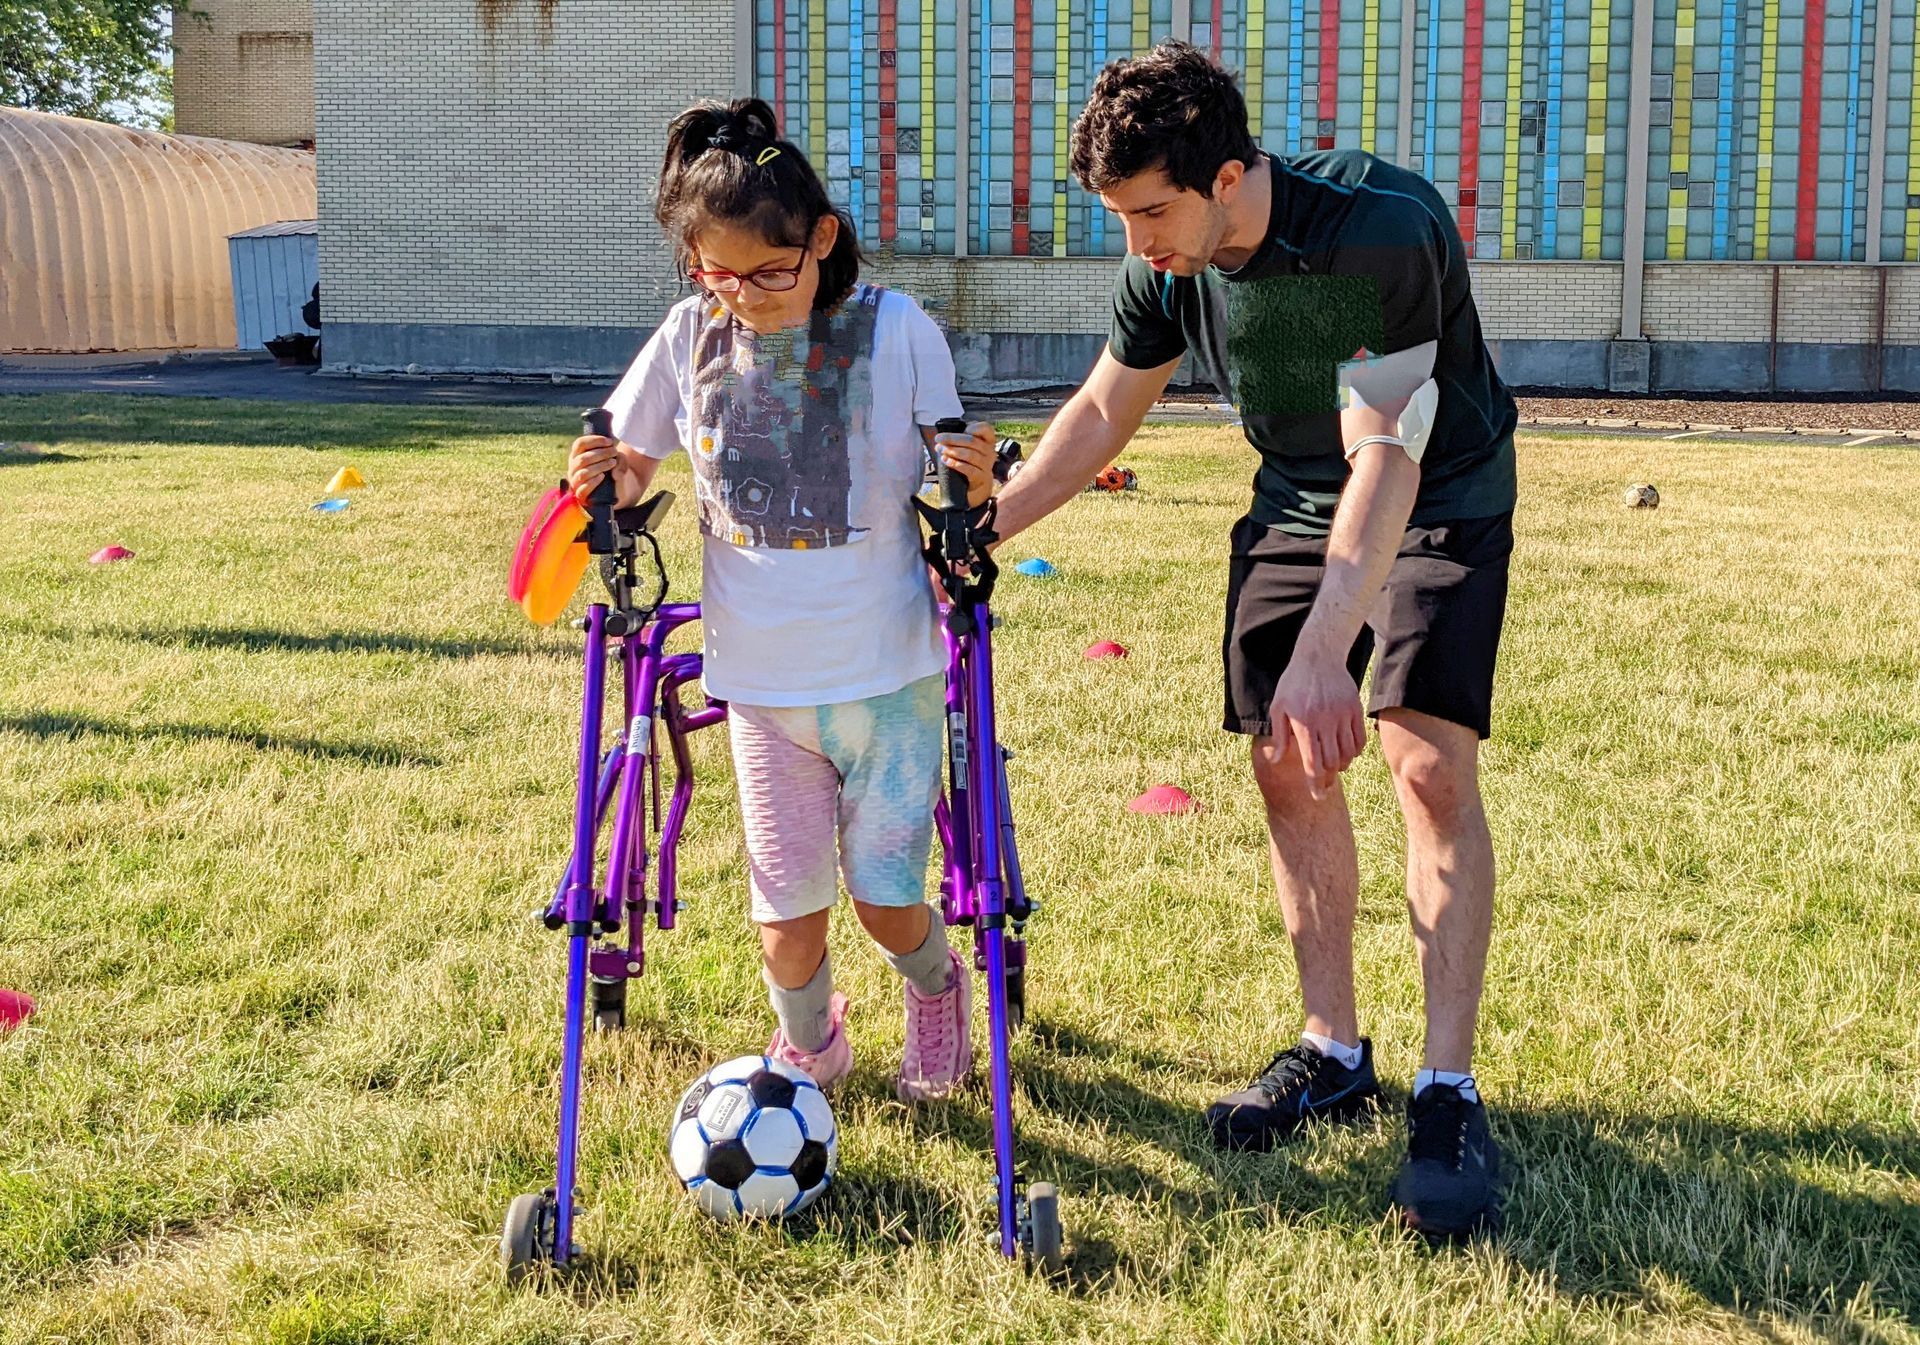 KEEN Chicago Athlete and Volunteer with soccer ball